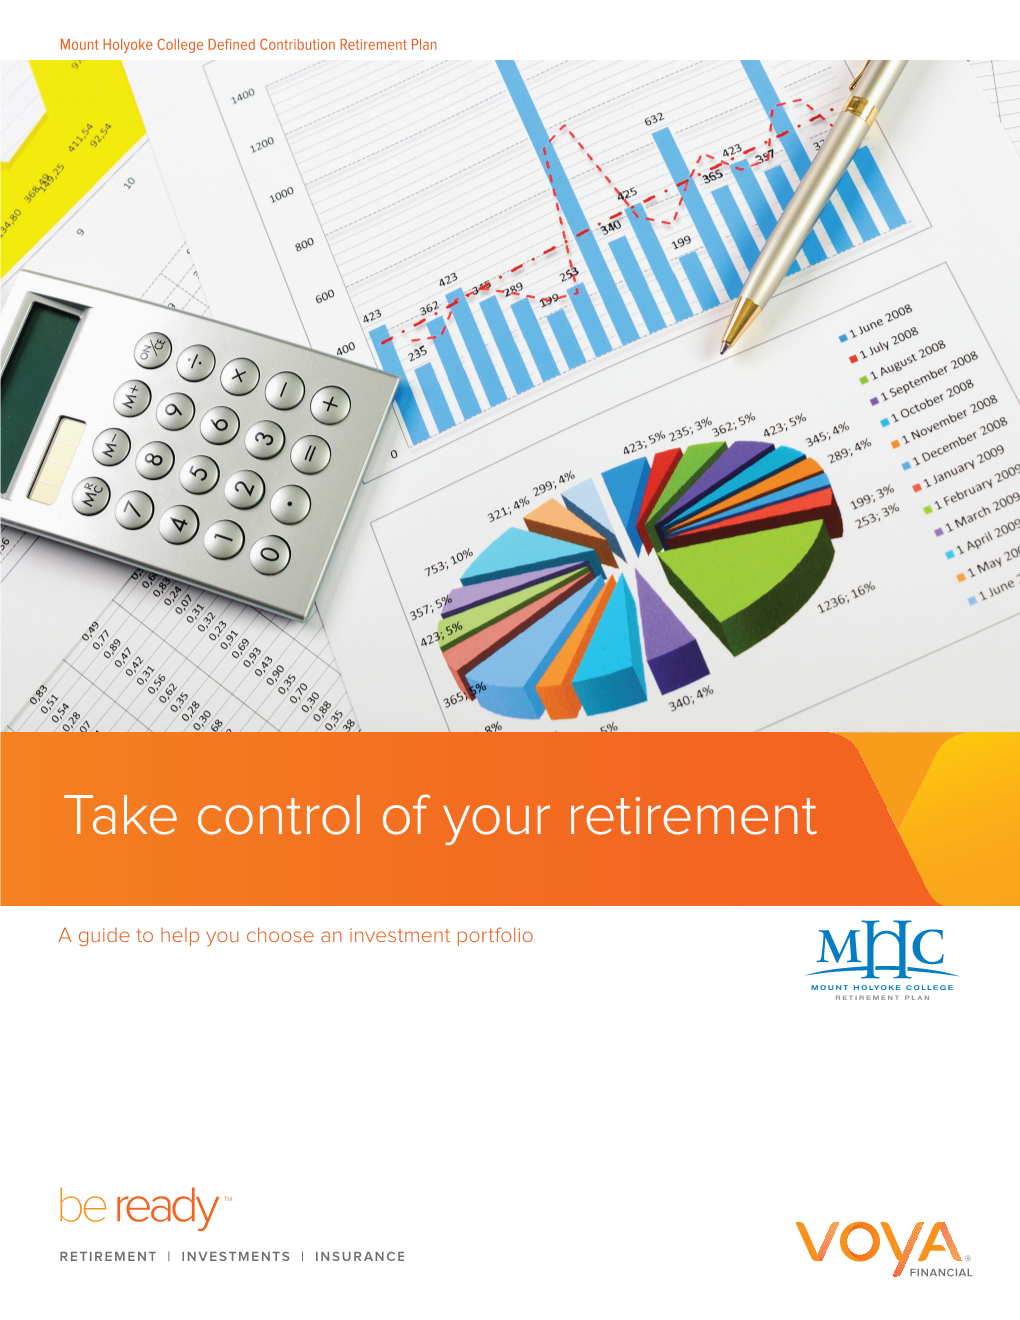 Take Control of Your Retirement